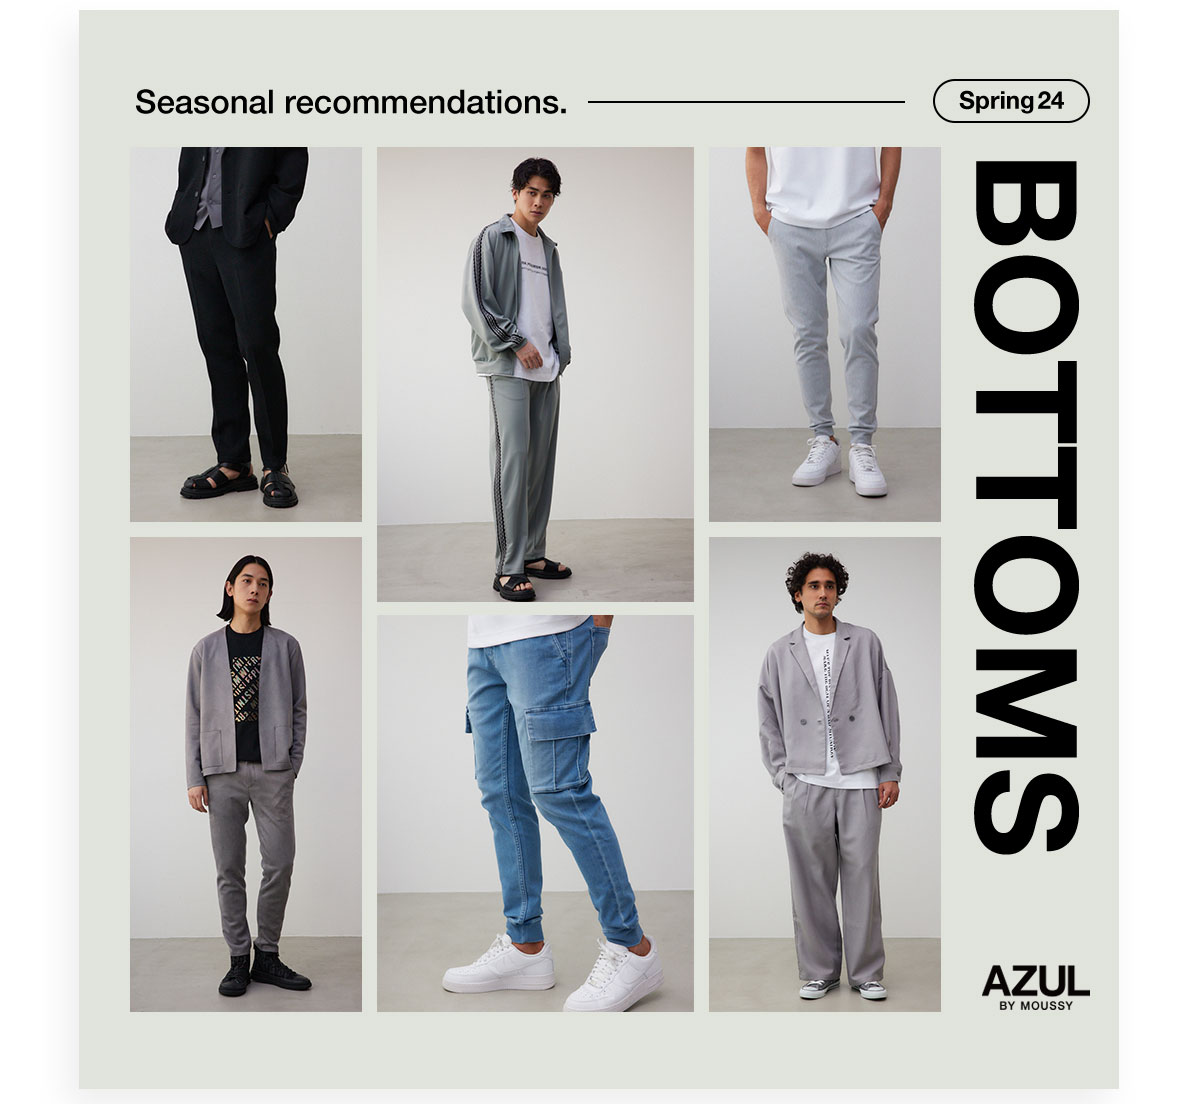 BOTTOMS Seasonal recommendations.Spring24